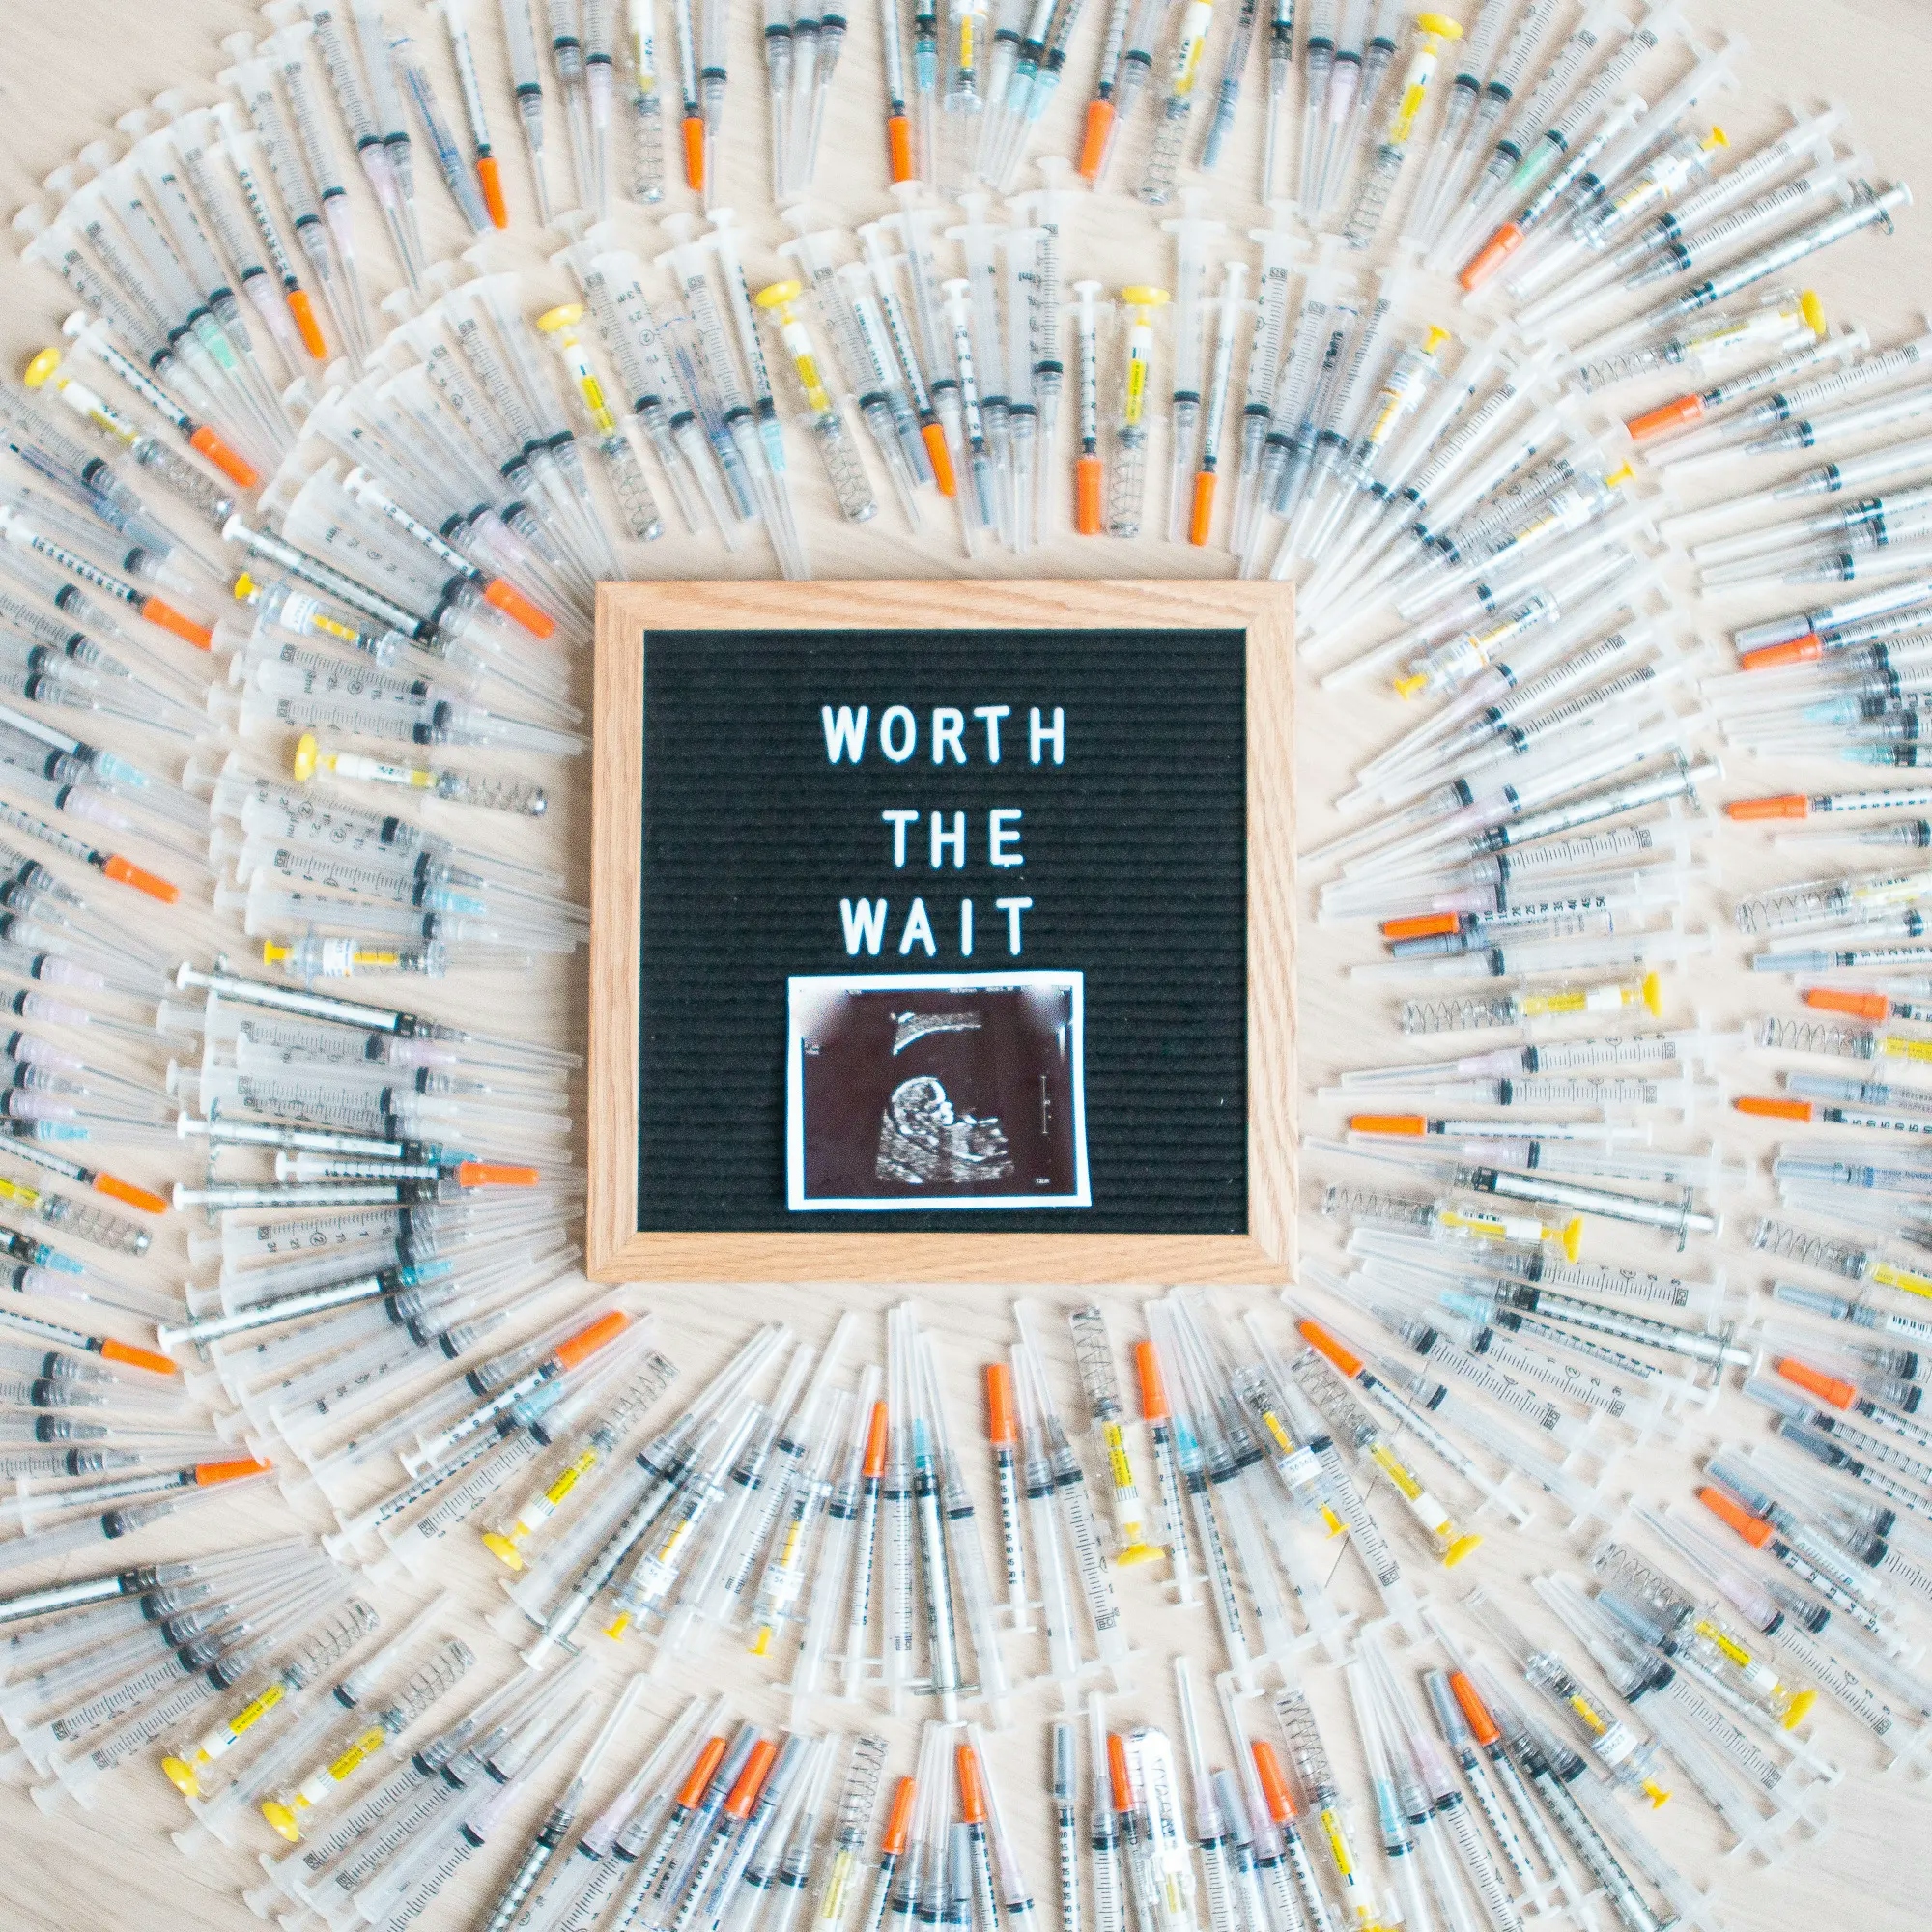 ivf shots with photo of sonogram and worth the wait written above it